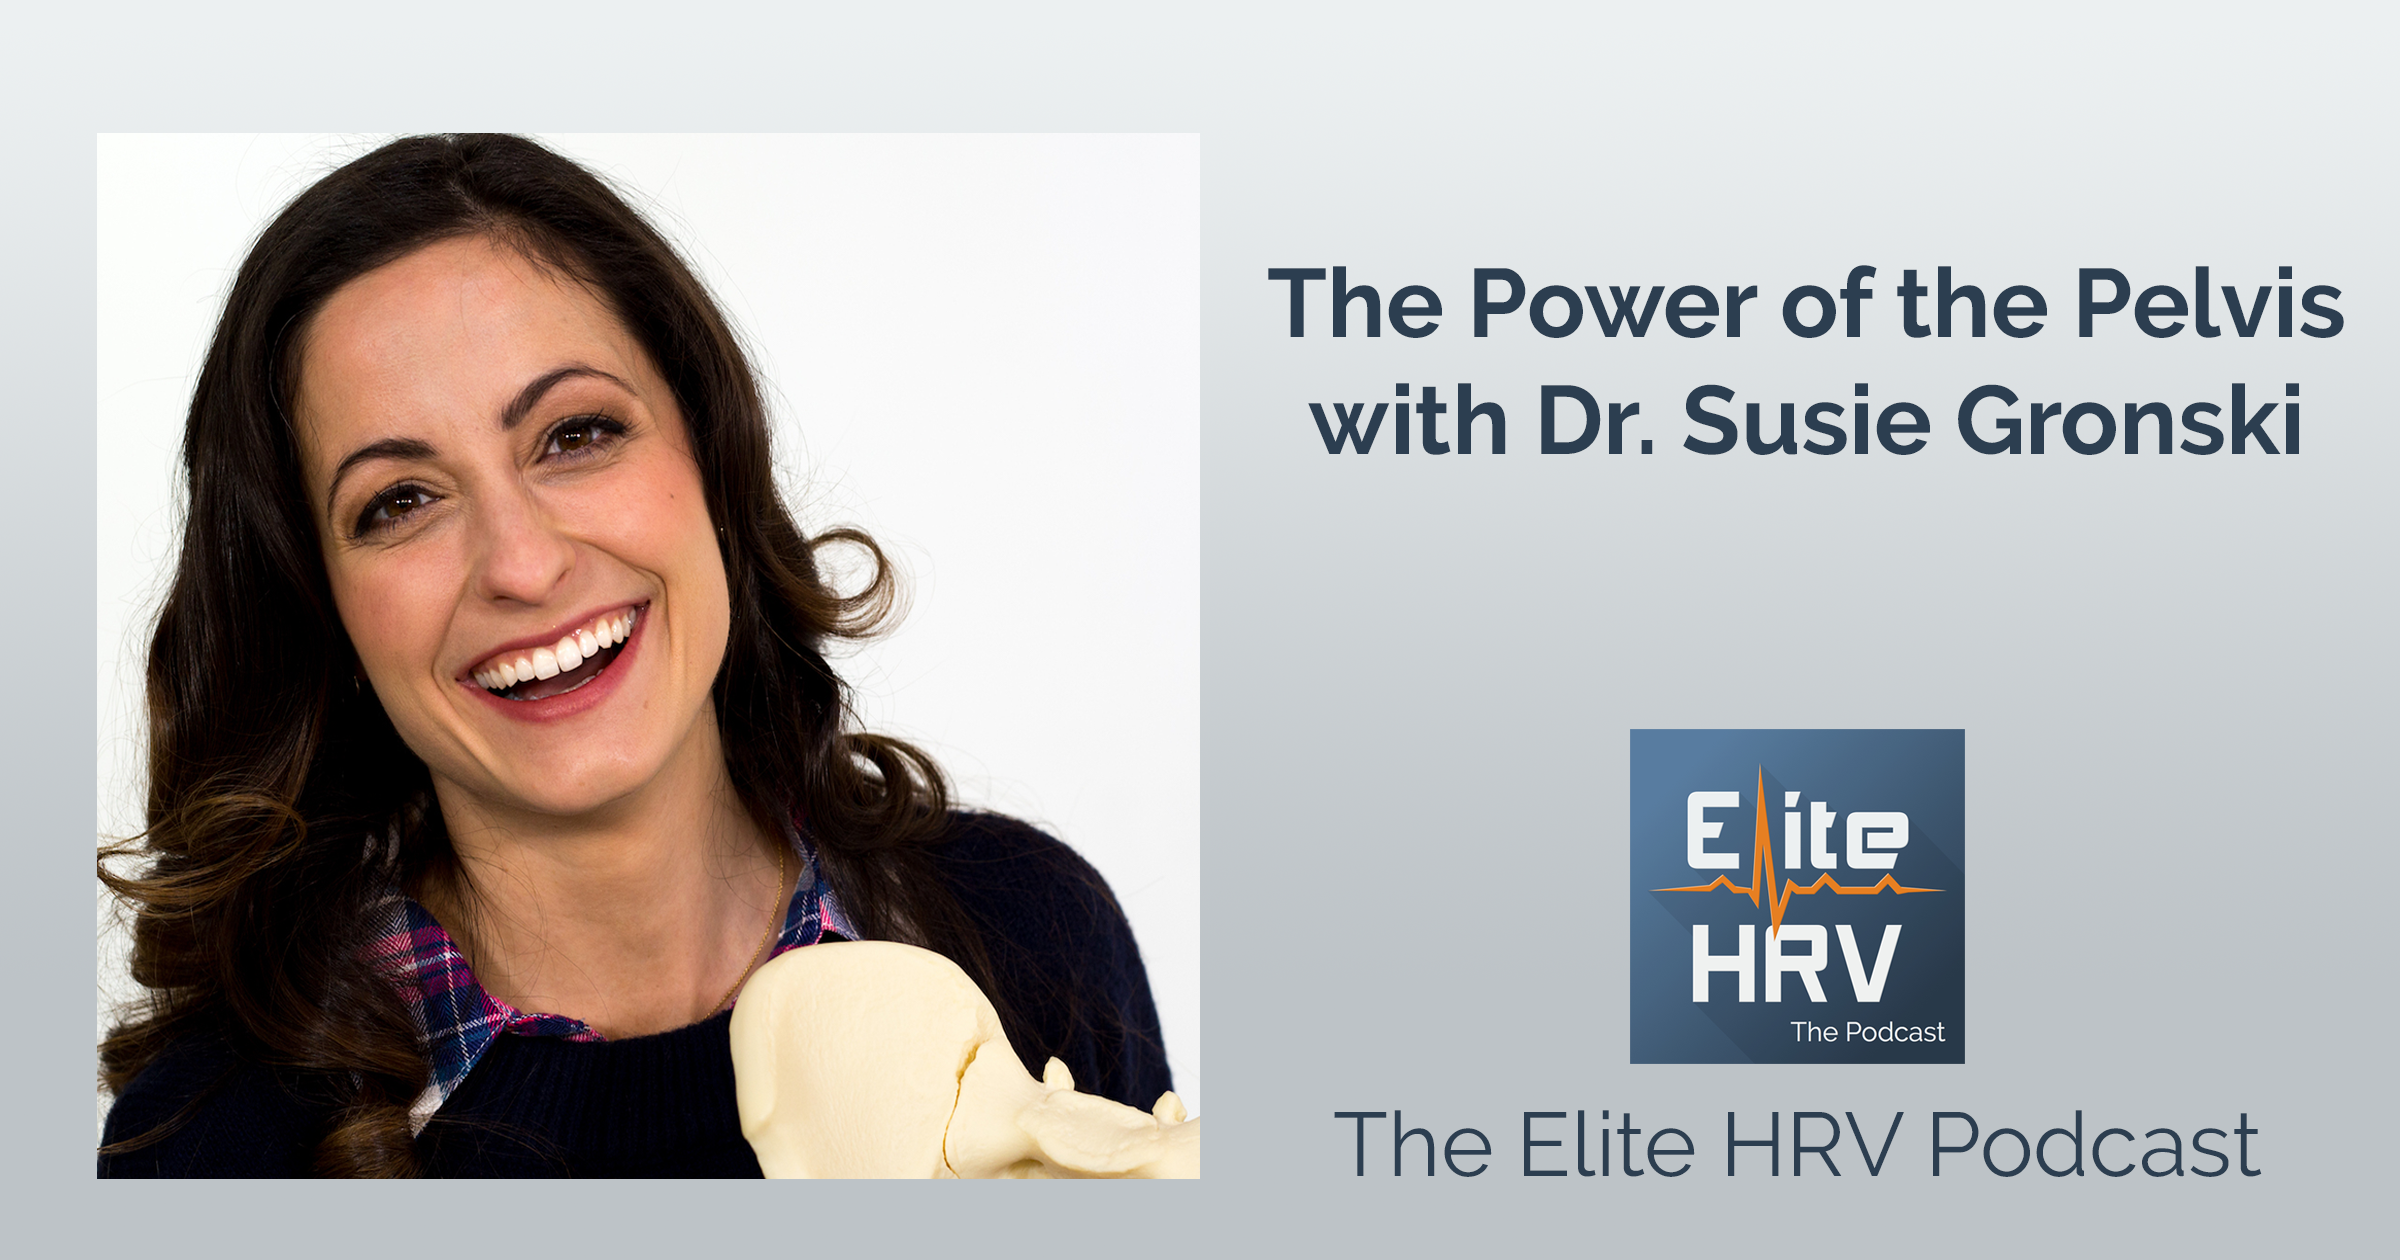 The Power of the Pelvis with Dr. Susie Gronksi